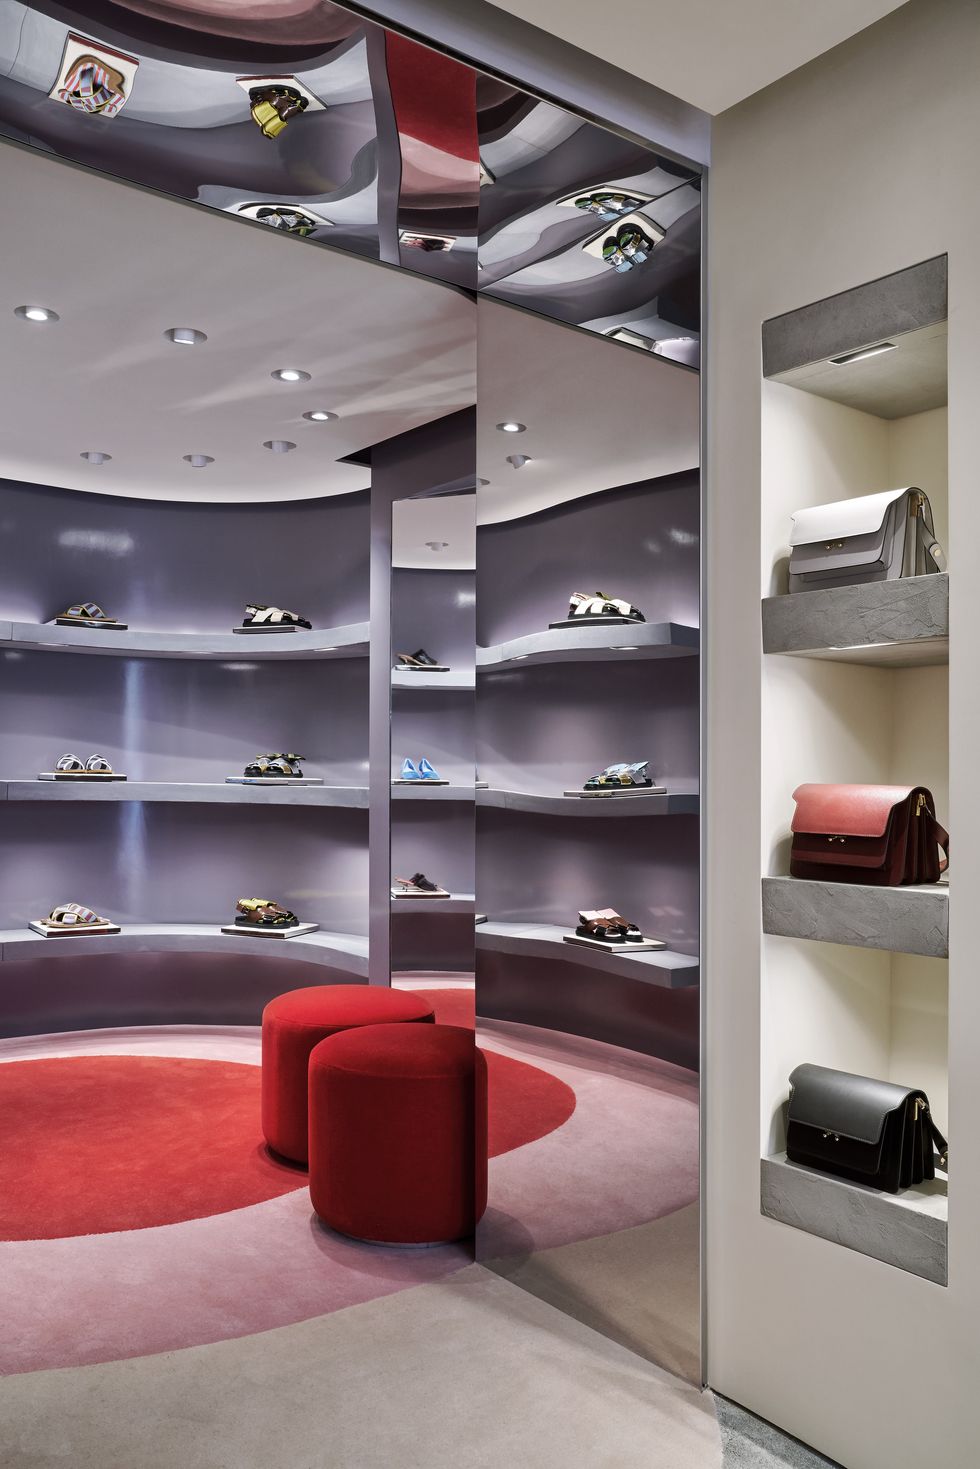 Room, Interior design, Shelf, Furniture, Ceiling, Wall, Building, Shelving, Shoe store, Architecture, 